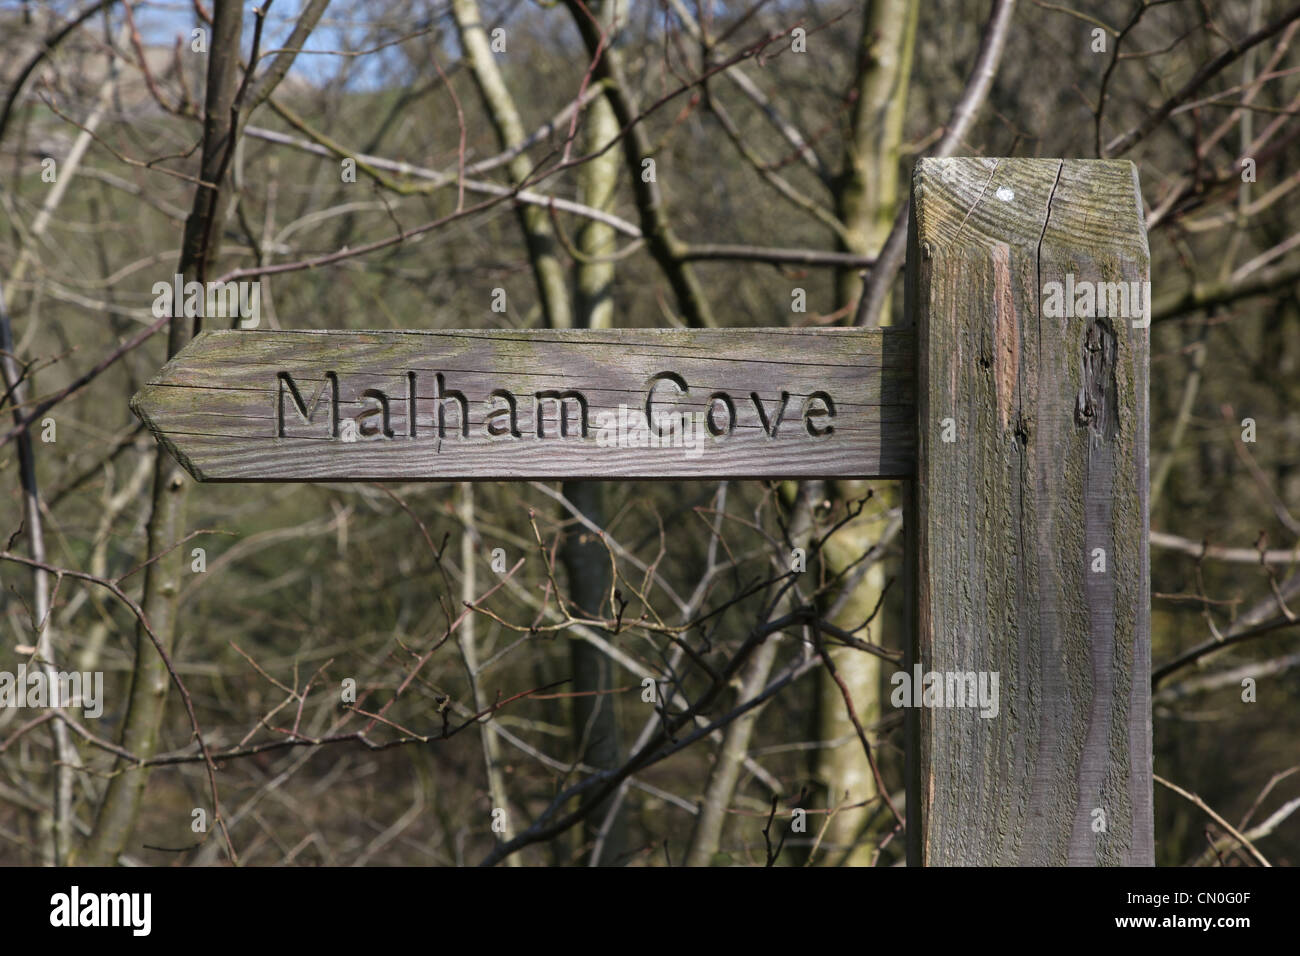 Signpost directions to Malham Cove, North Yorkshire. Stock Photo